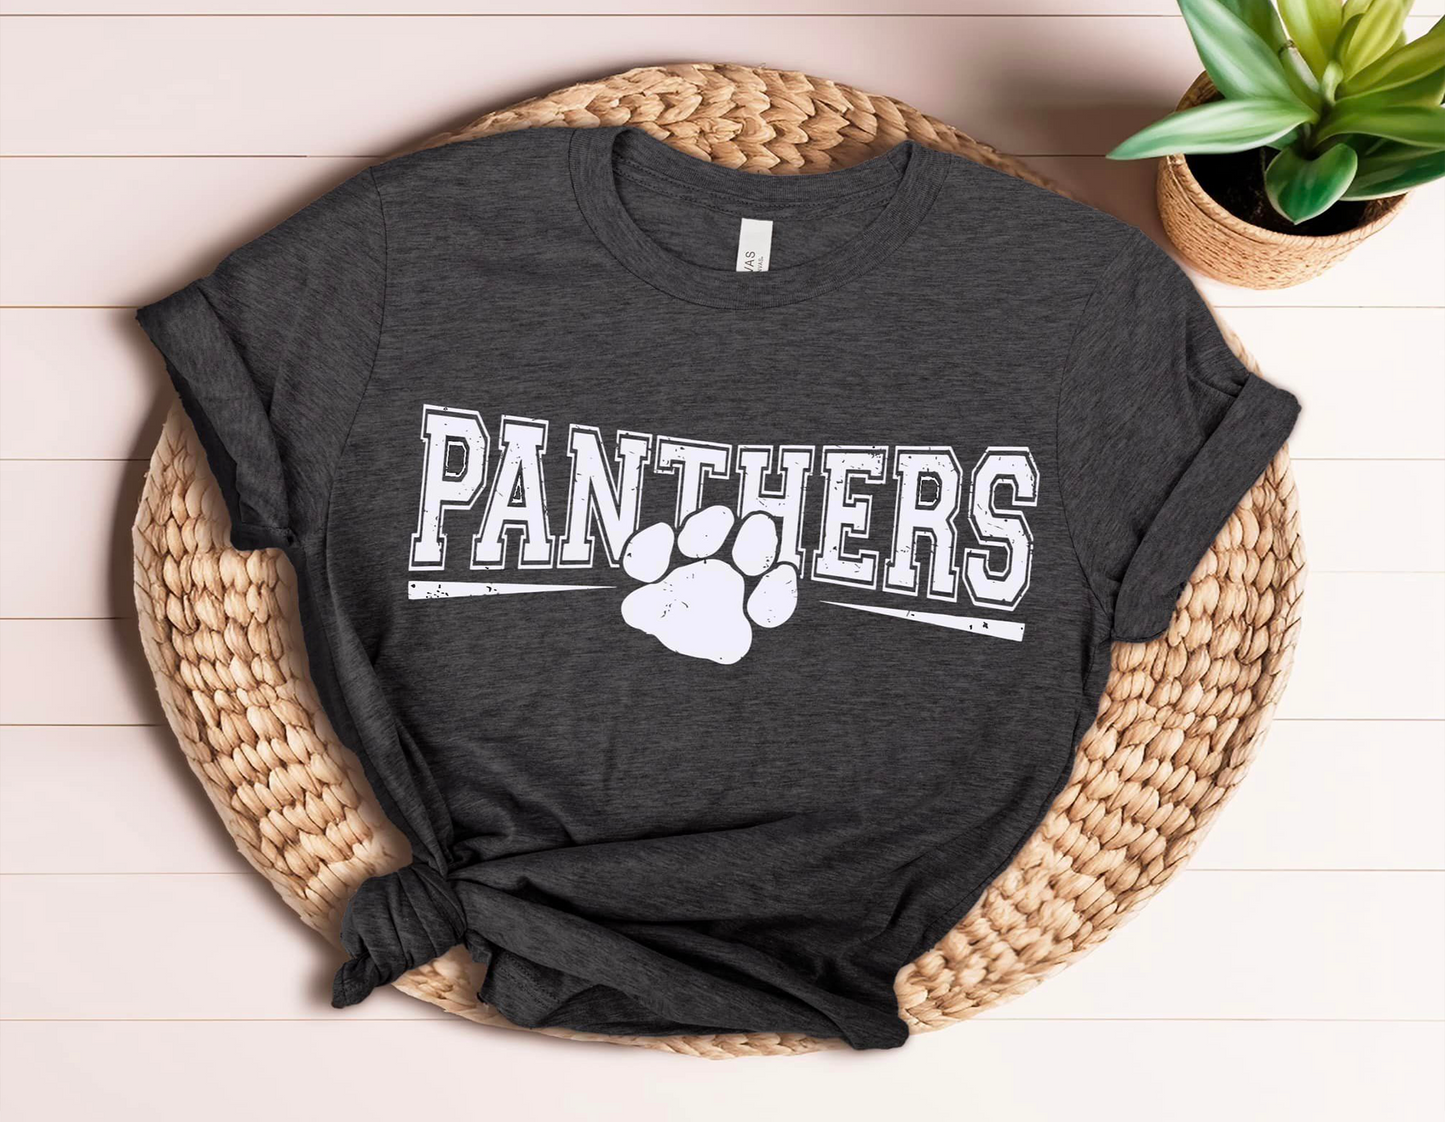 Perry Panther T-Shirt